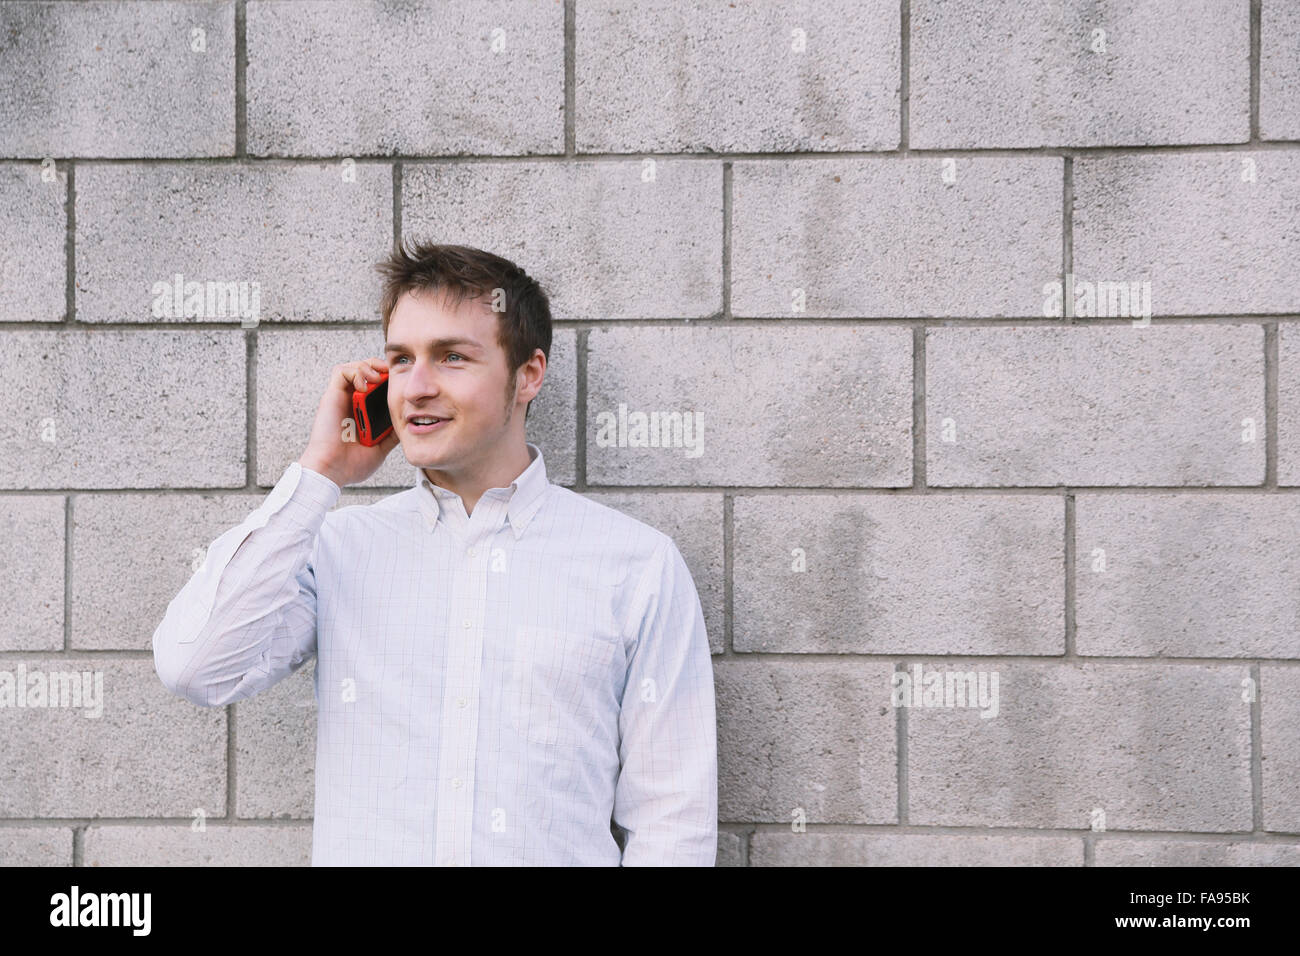 Portrait of young Caucasian man on the phone Stock Photo